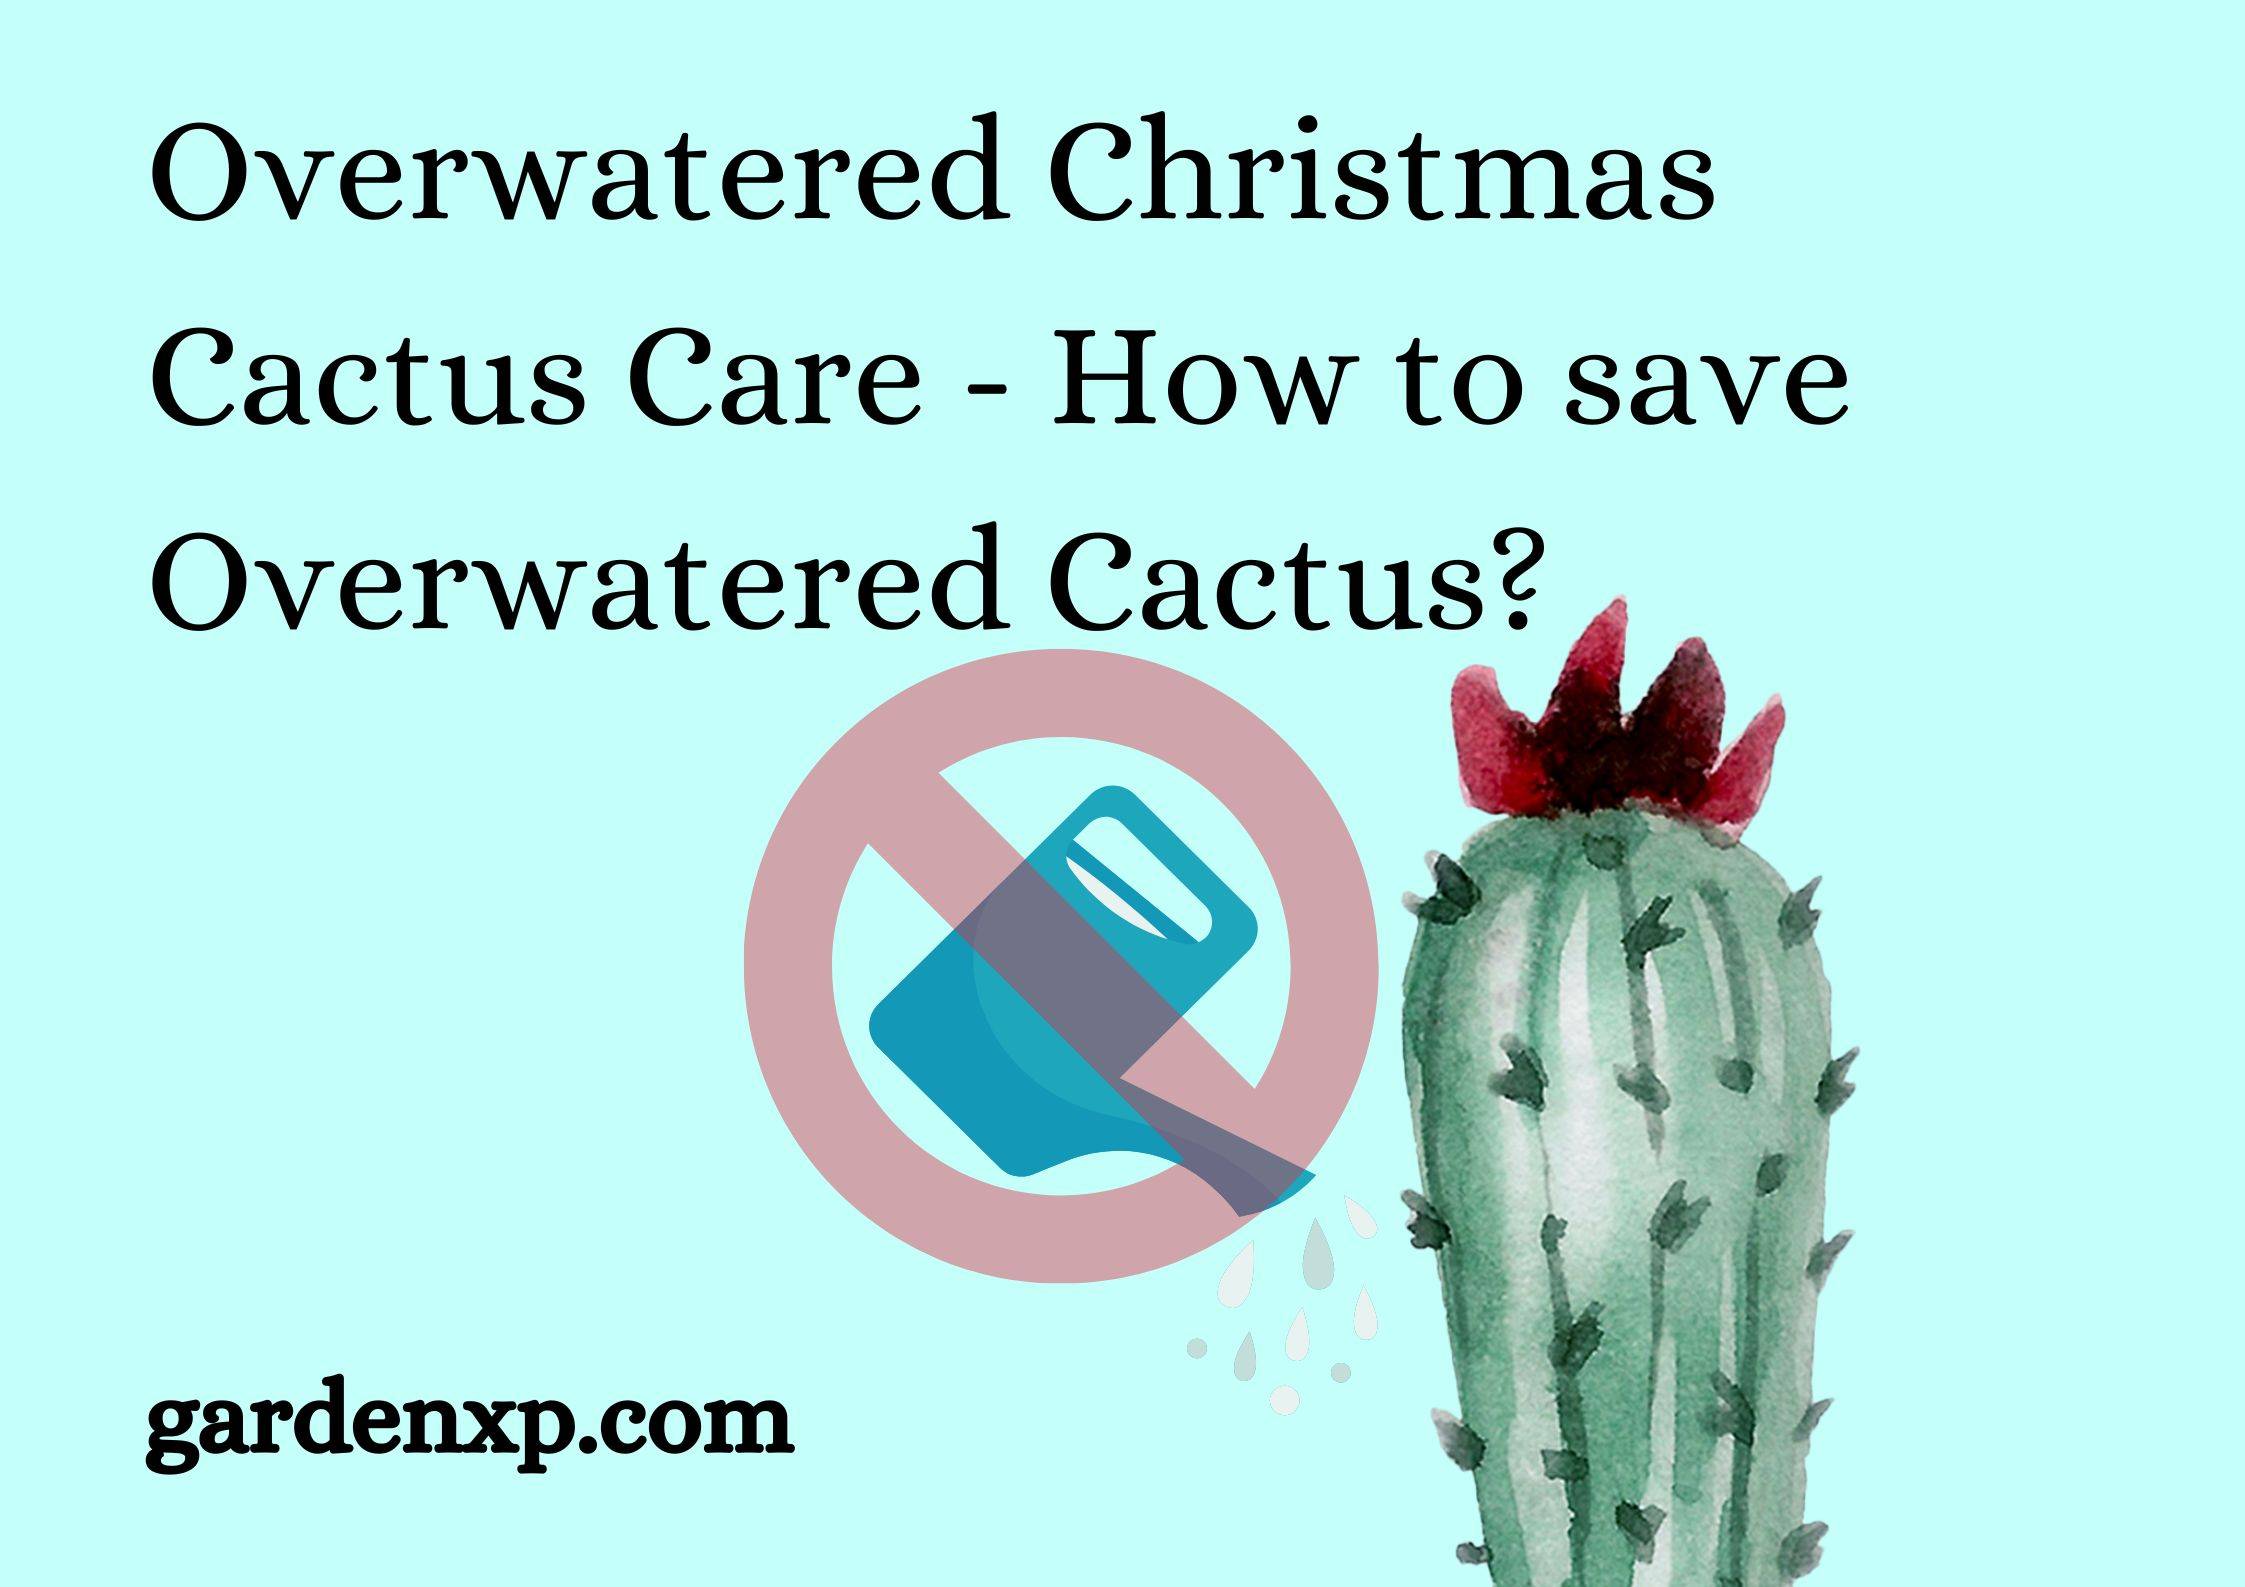 Overwatered Christmas Cactus Care - How to save Overwatered Cactus?